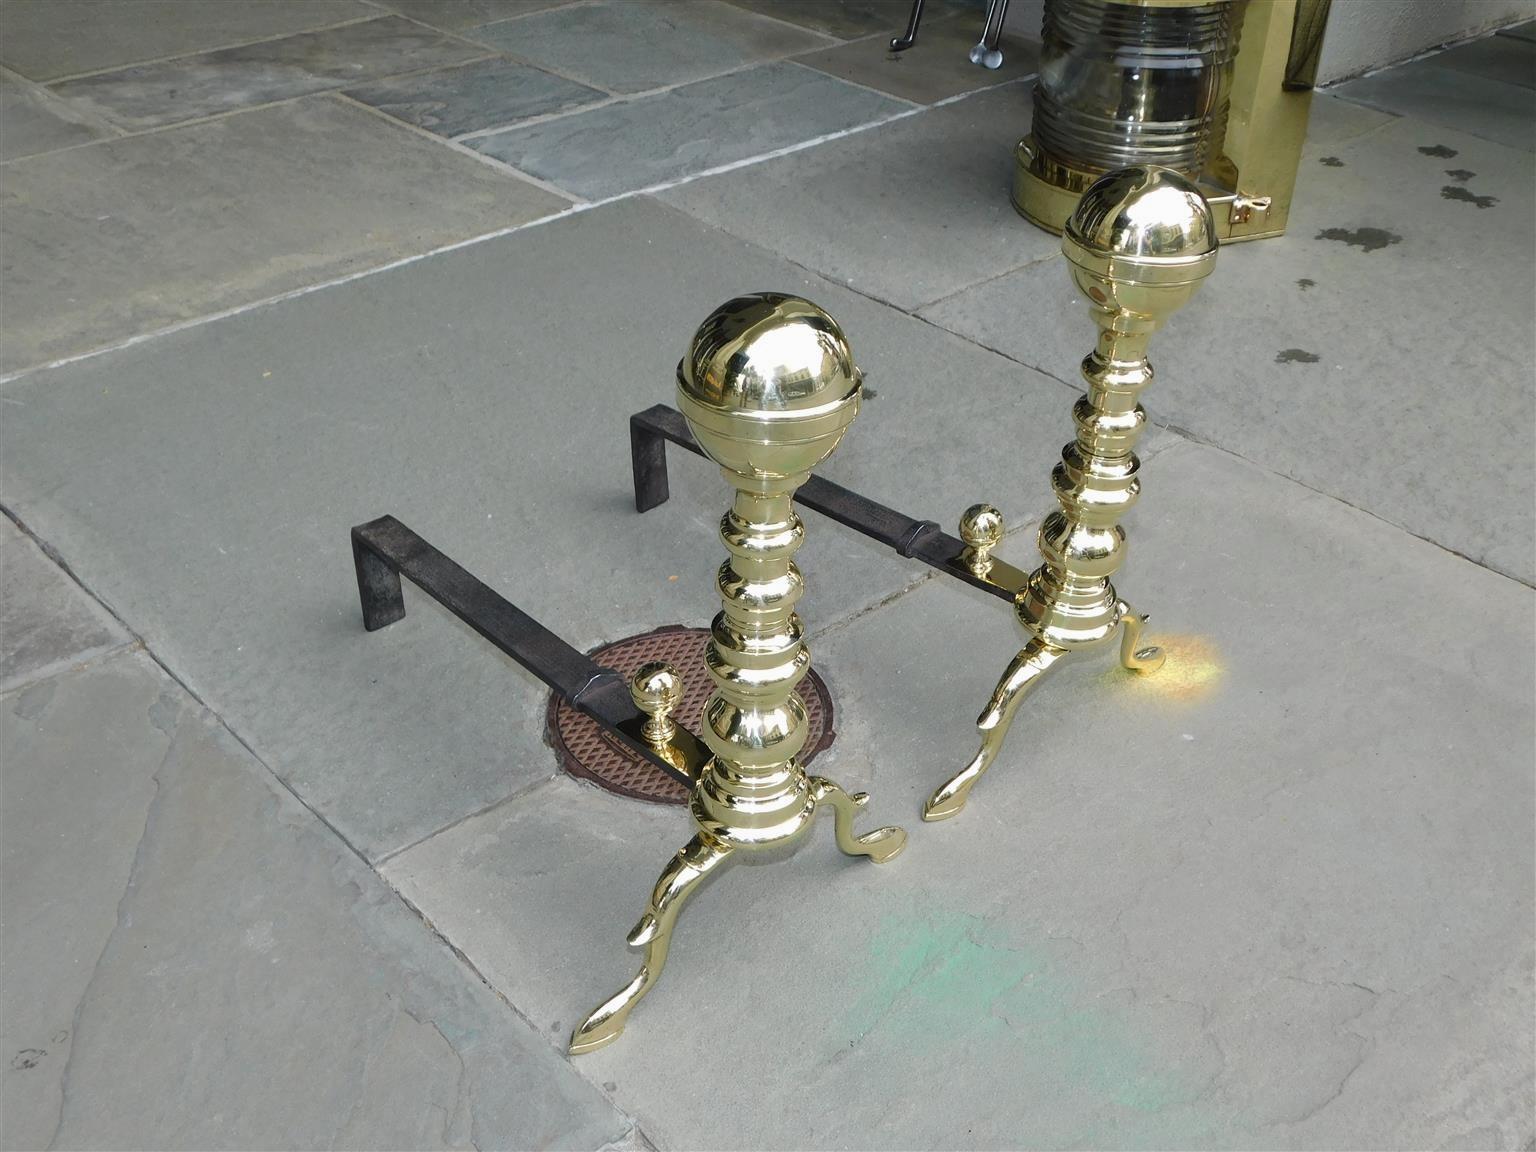 Pair of American brass banded flanking ball finial andirons with turned bulbous plinths, matching ball banded log stops, original wrought iron rear dog legs, and resting on spur legs with slipper feet. Boston, MA. Early 19th Century.